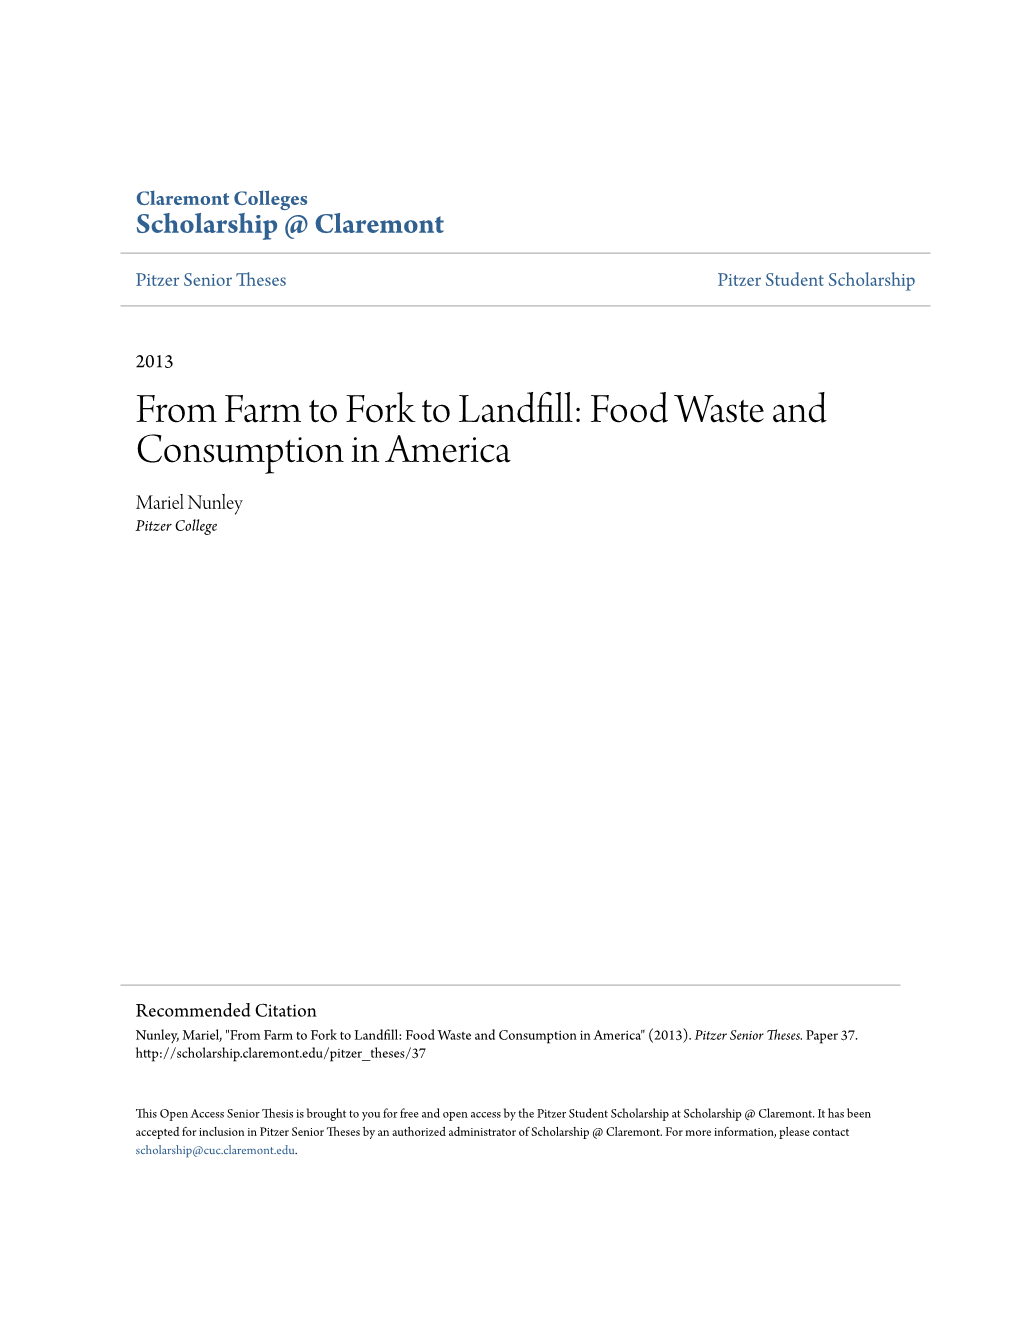 From Farm to Fork to Landfill: Food Waste and Consumption in America Mariel Nunley Pitzer College